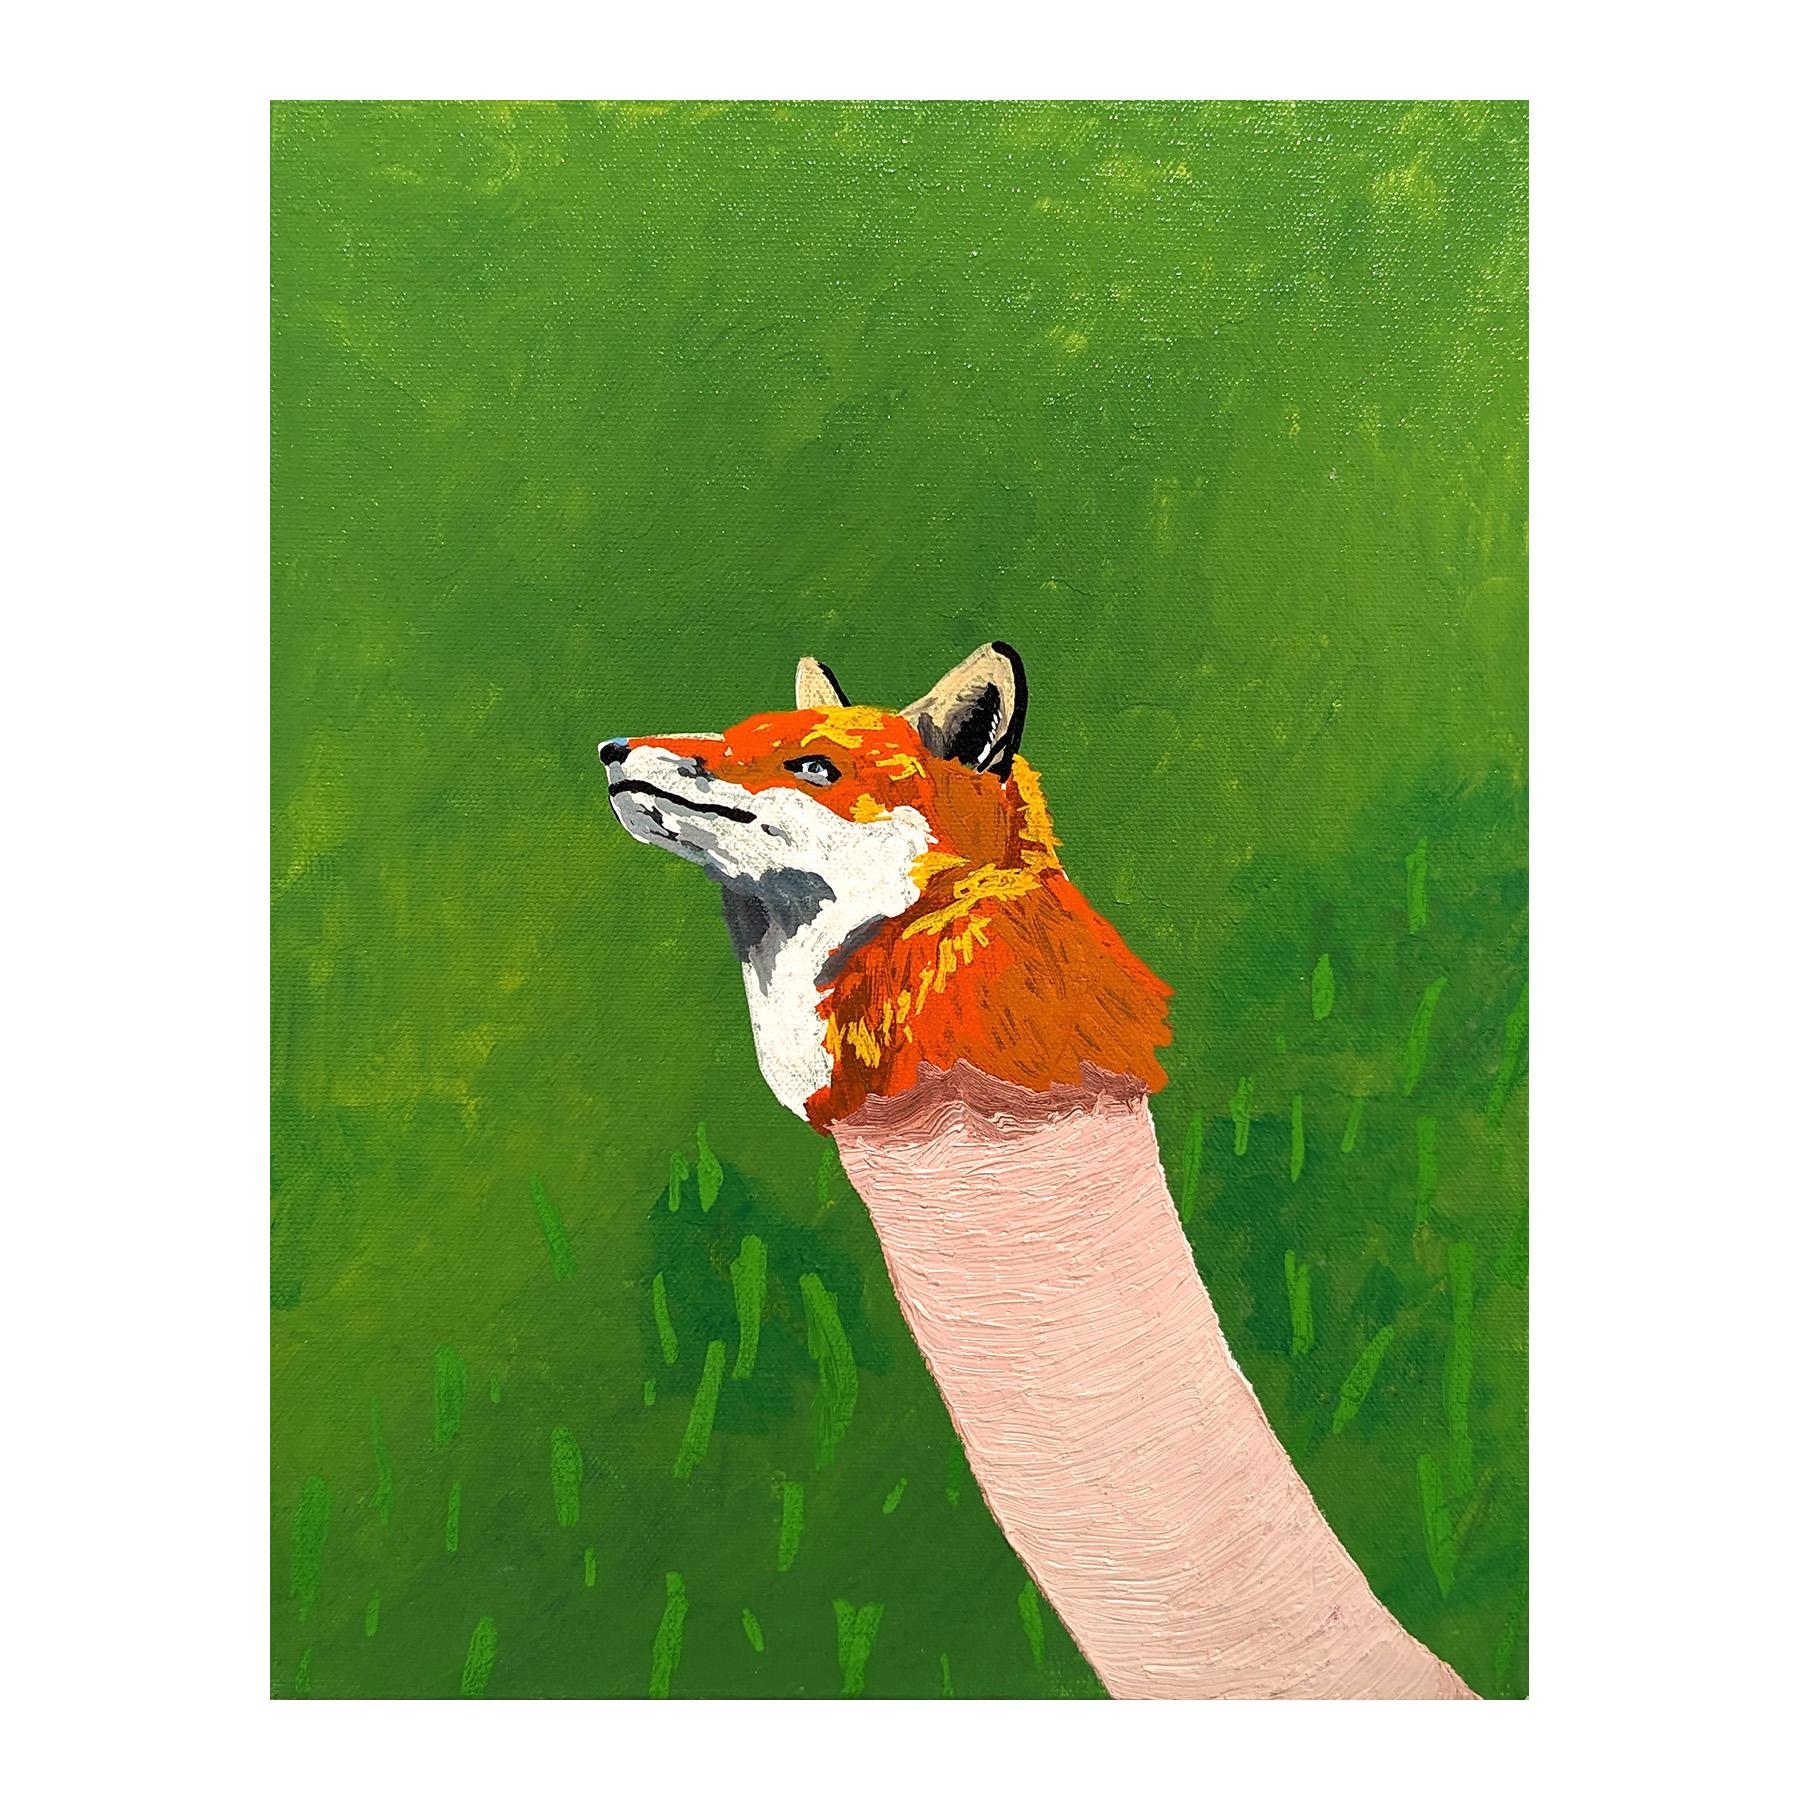 Colorful dark humor painting by Memphis-based contemporary artist Alex Paulus. The work features naturalistically depicted fox head on the end of a worm-like creature set against a background of green grass. Currently unframed, but options are